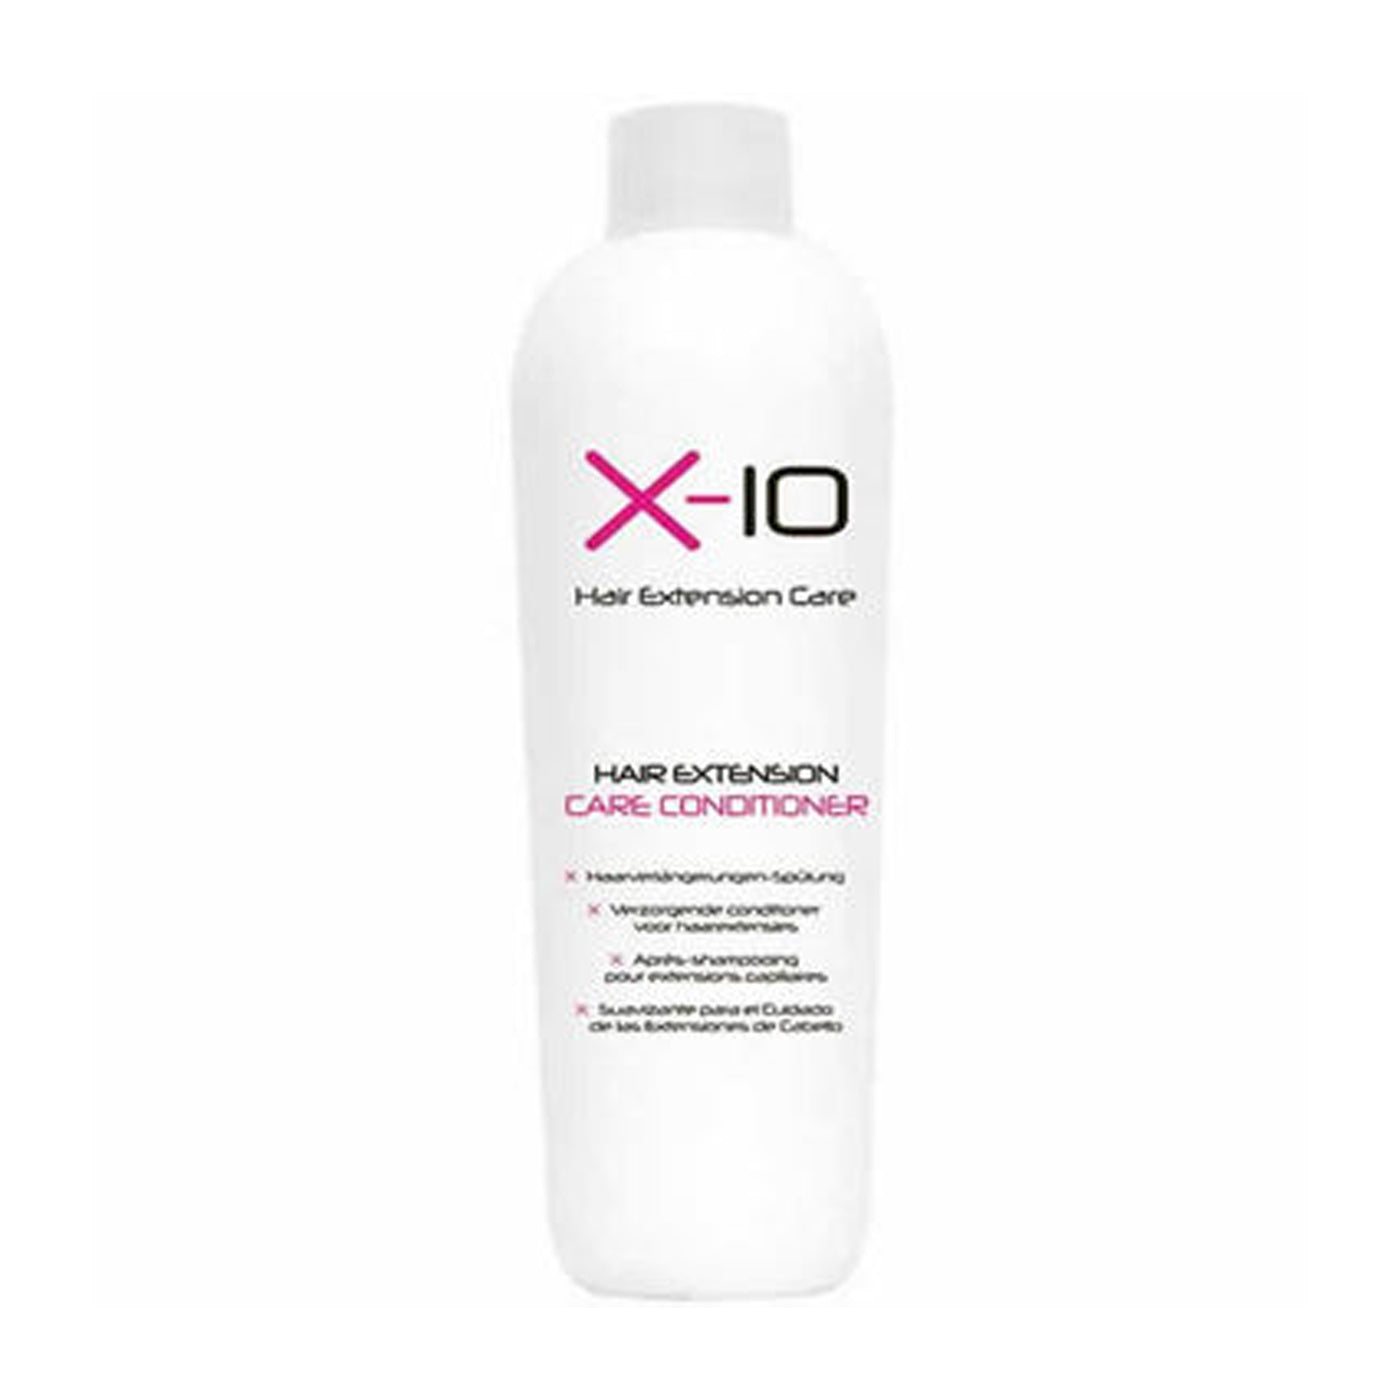 X-10 Hair Extension Care Conditioner (250ml) - Ultimate Hair and Beauty